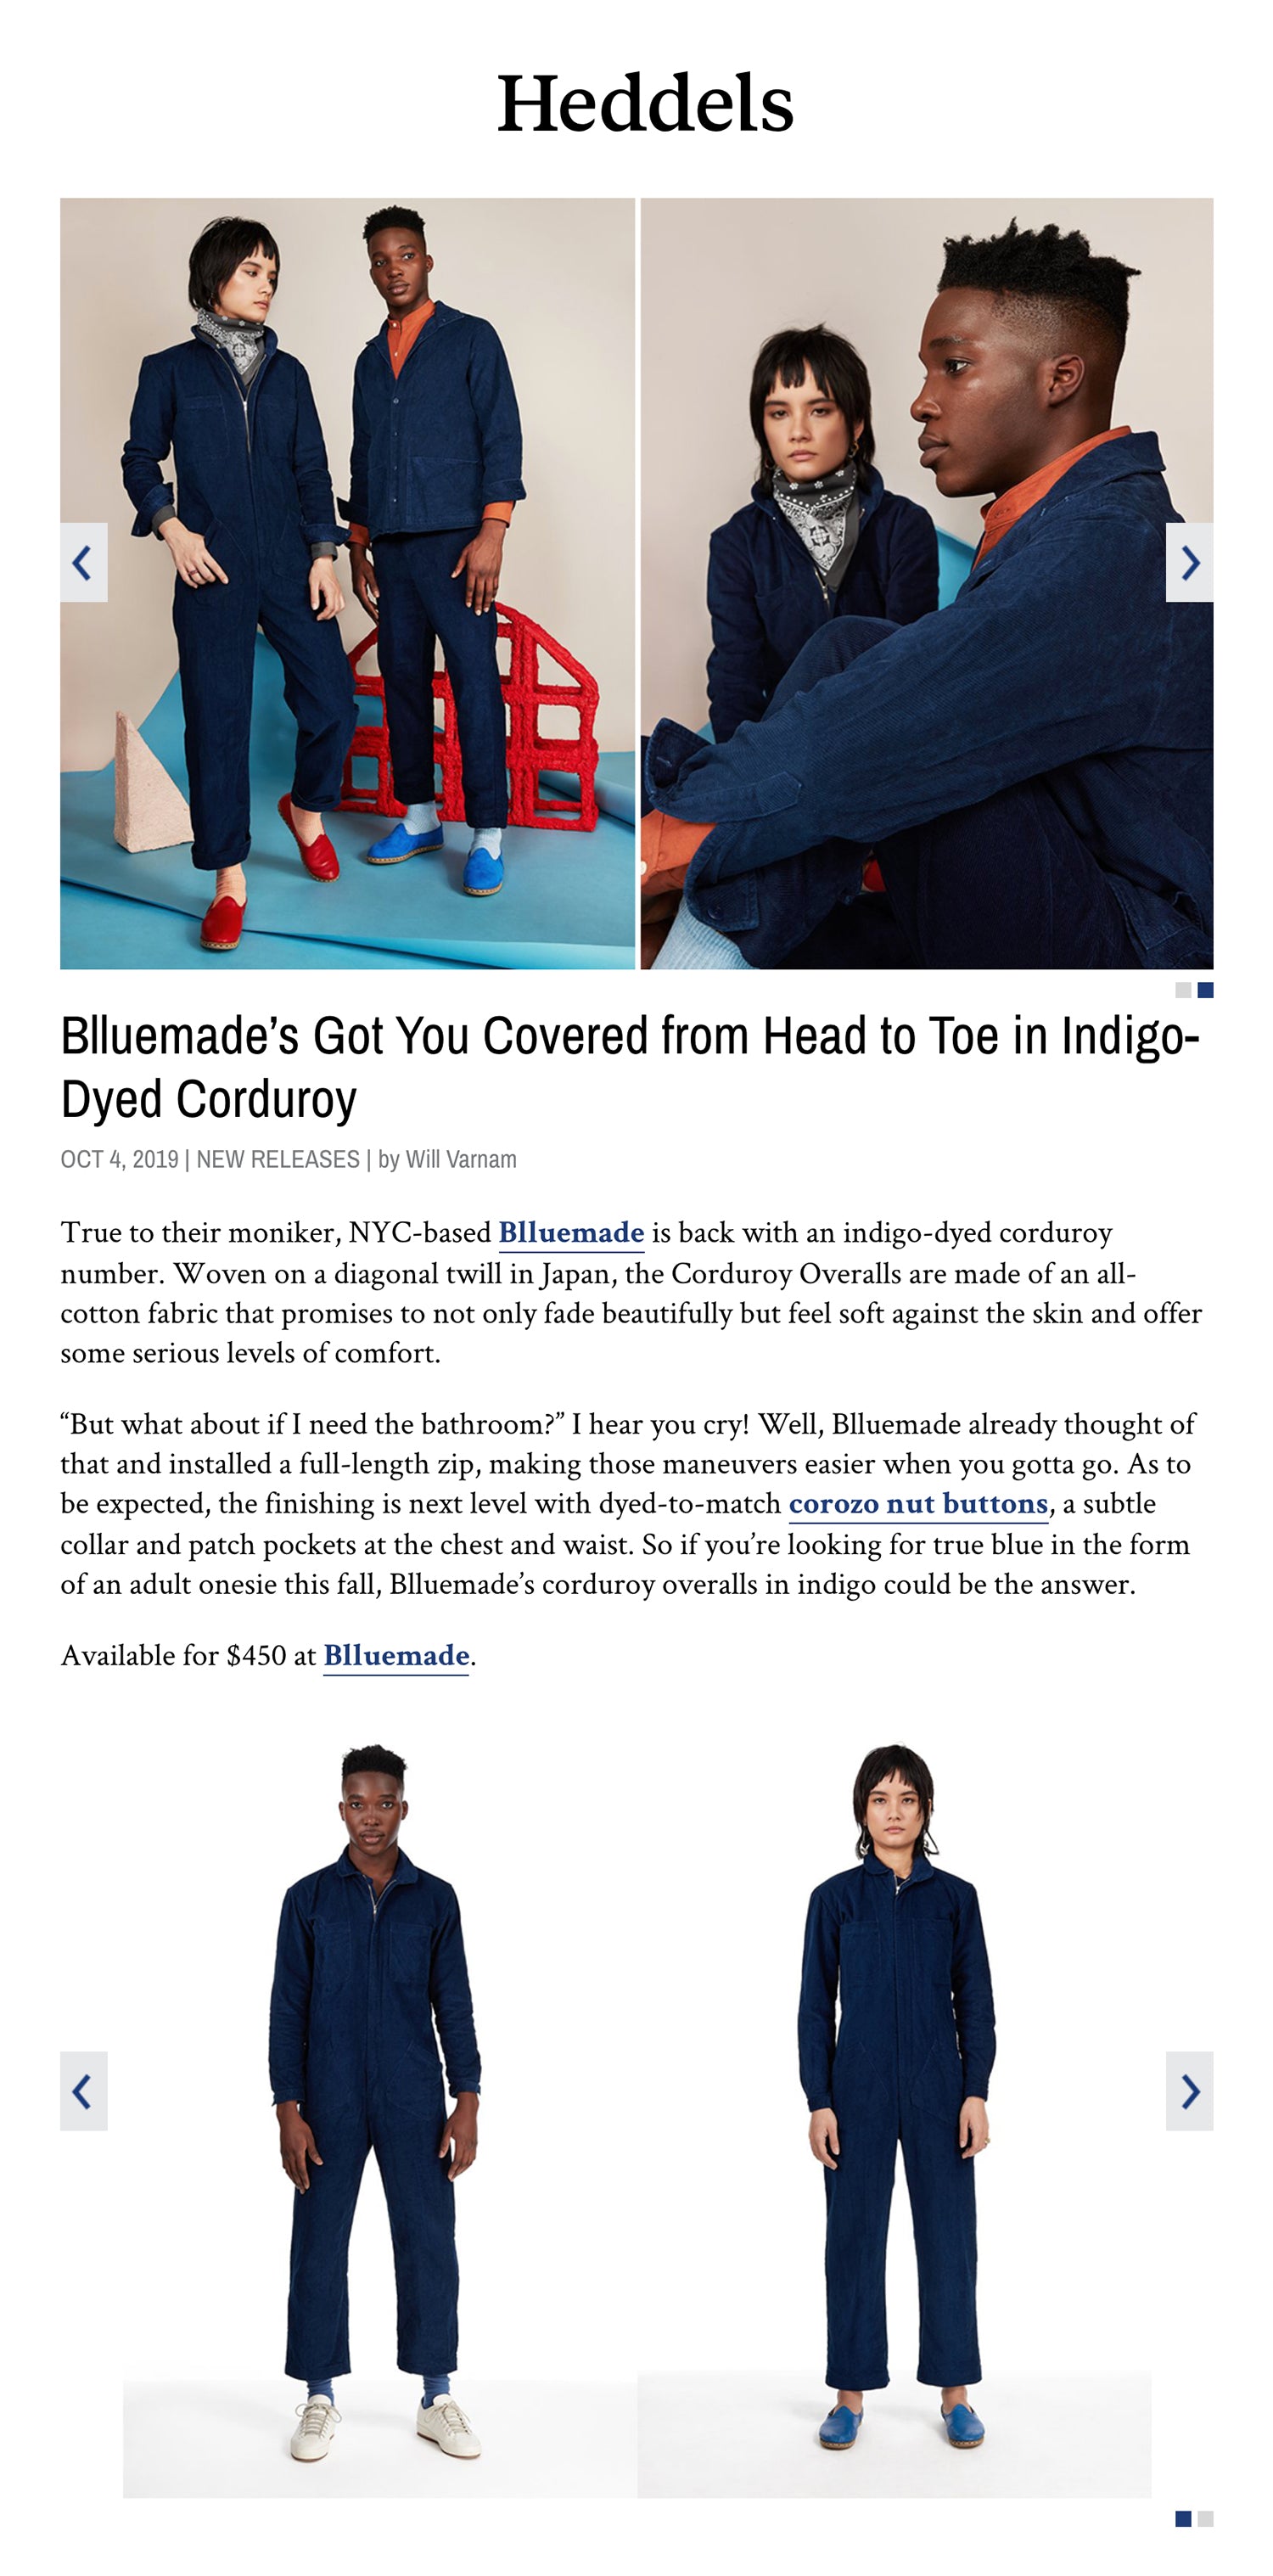 Blluemade Press Heddels Blluemade’s Got You Covered from Head to Toe in Indigo-Dyed Corduroy